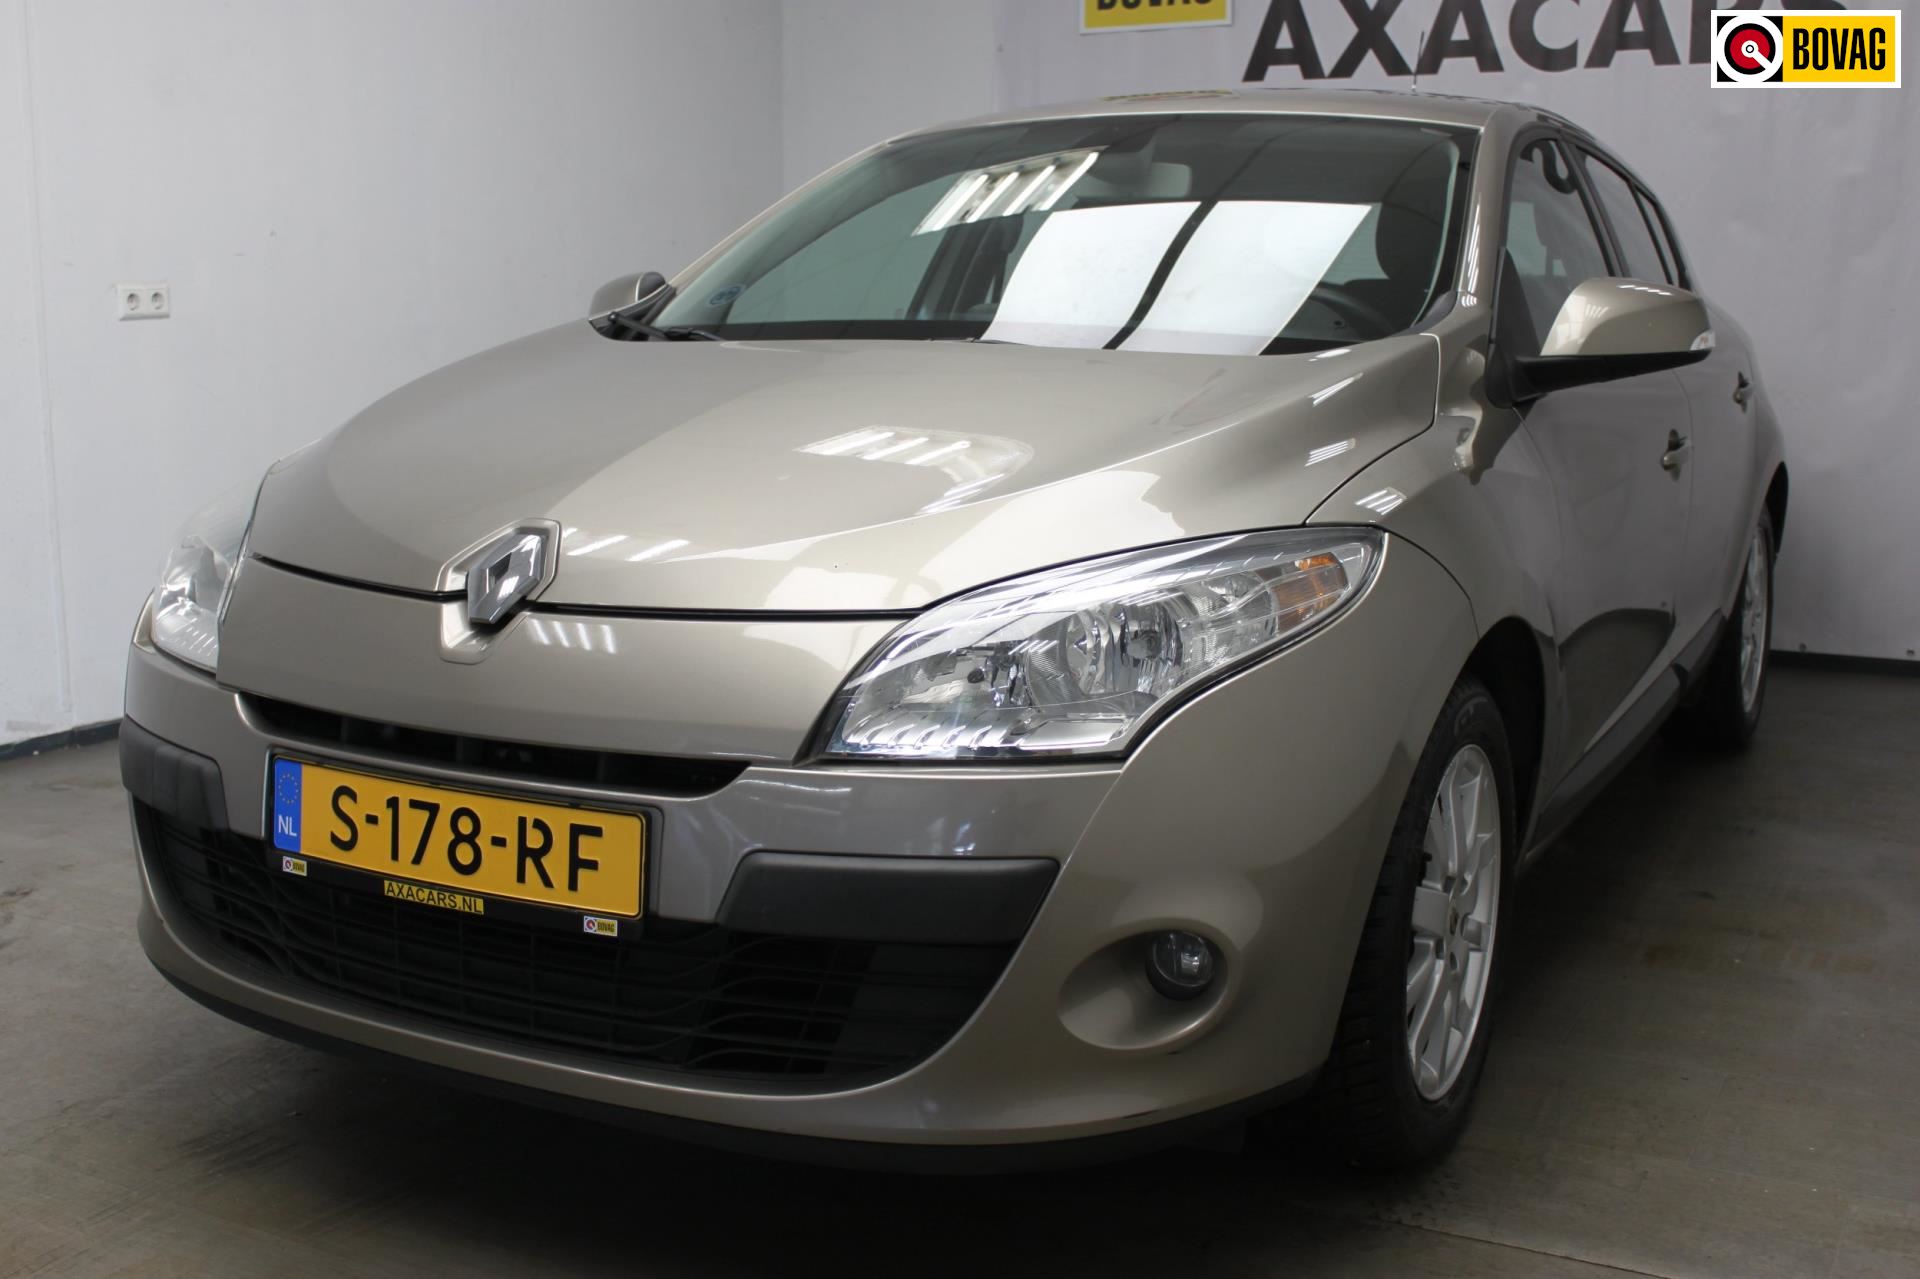 Renault MEGANE occasion - Autoservice Axacars